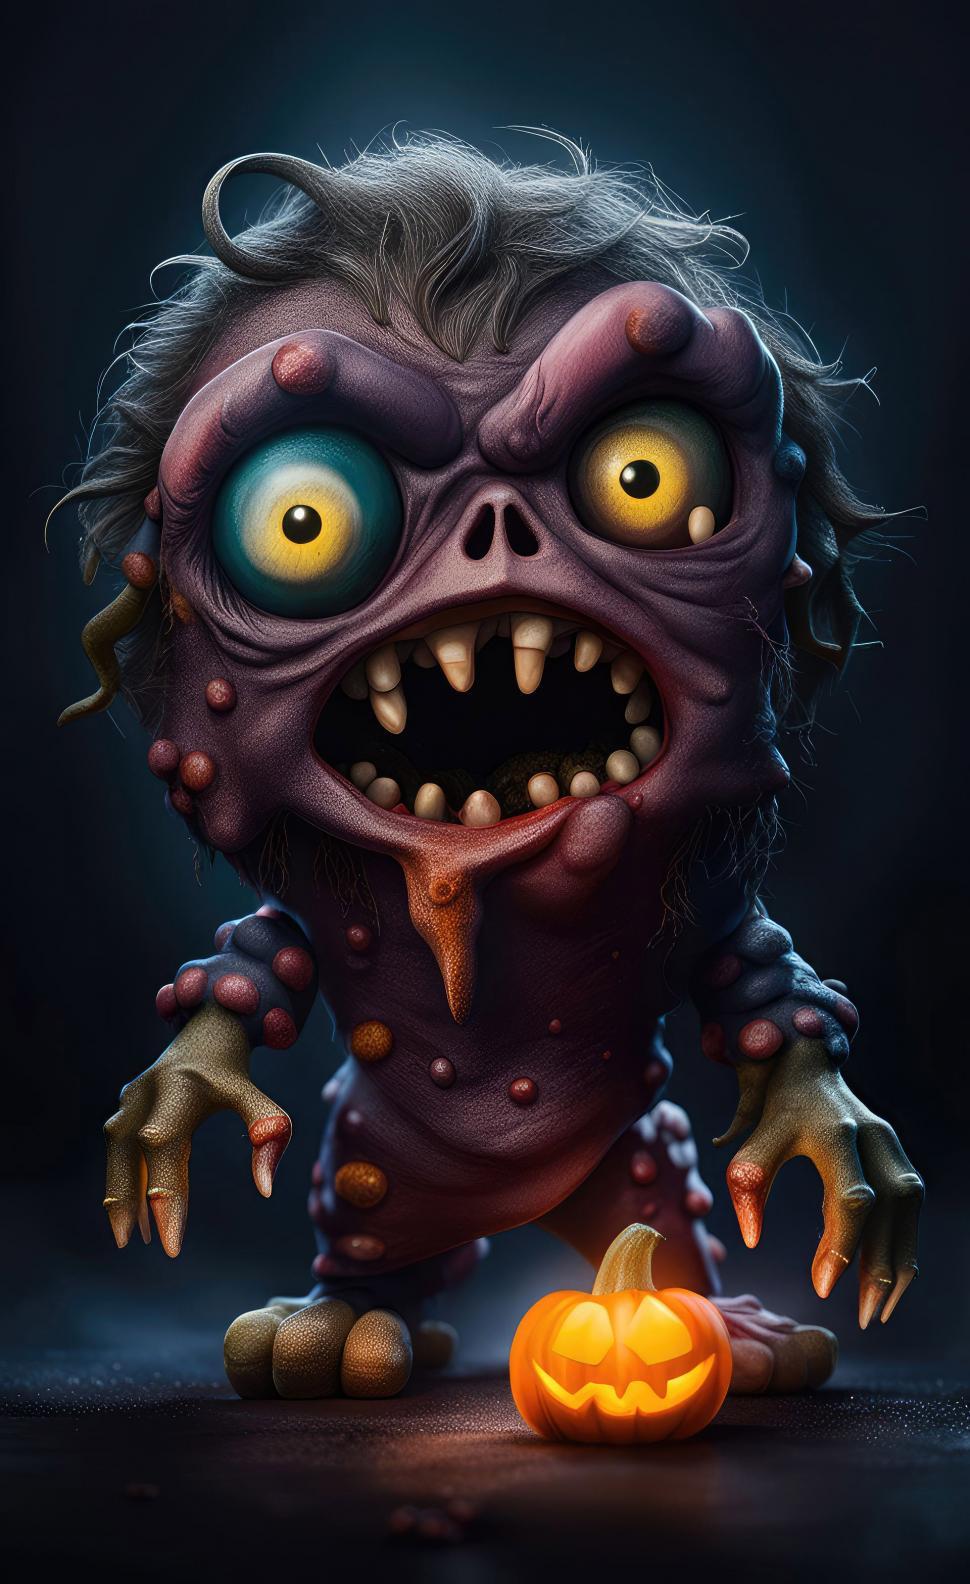 Free Image of Spooky halloween zombie monster with pumpkin 